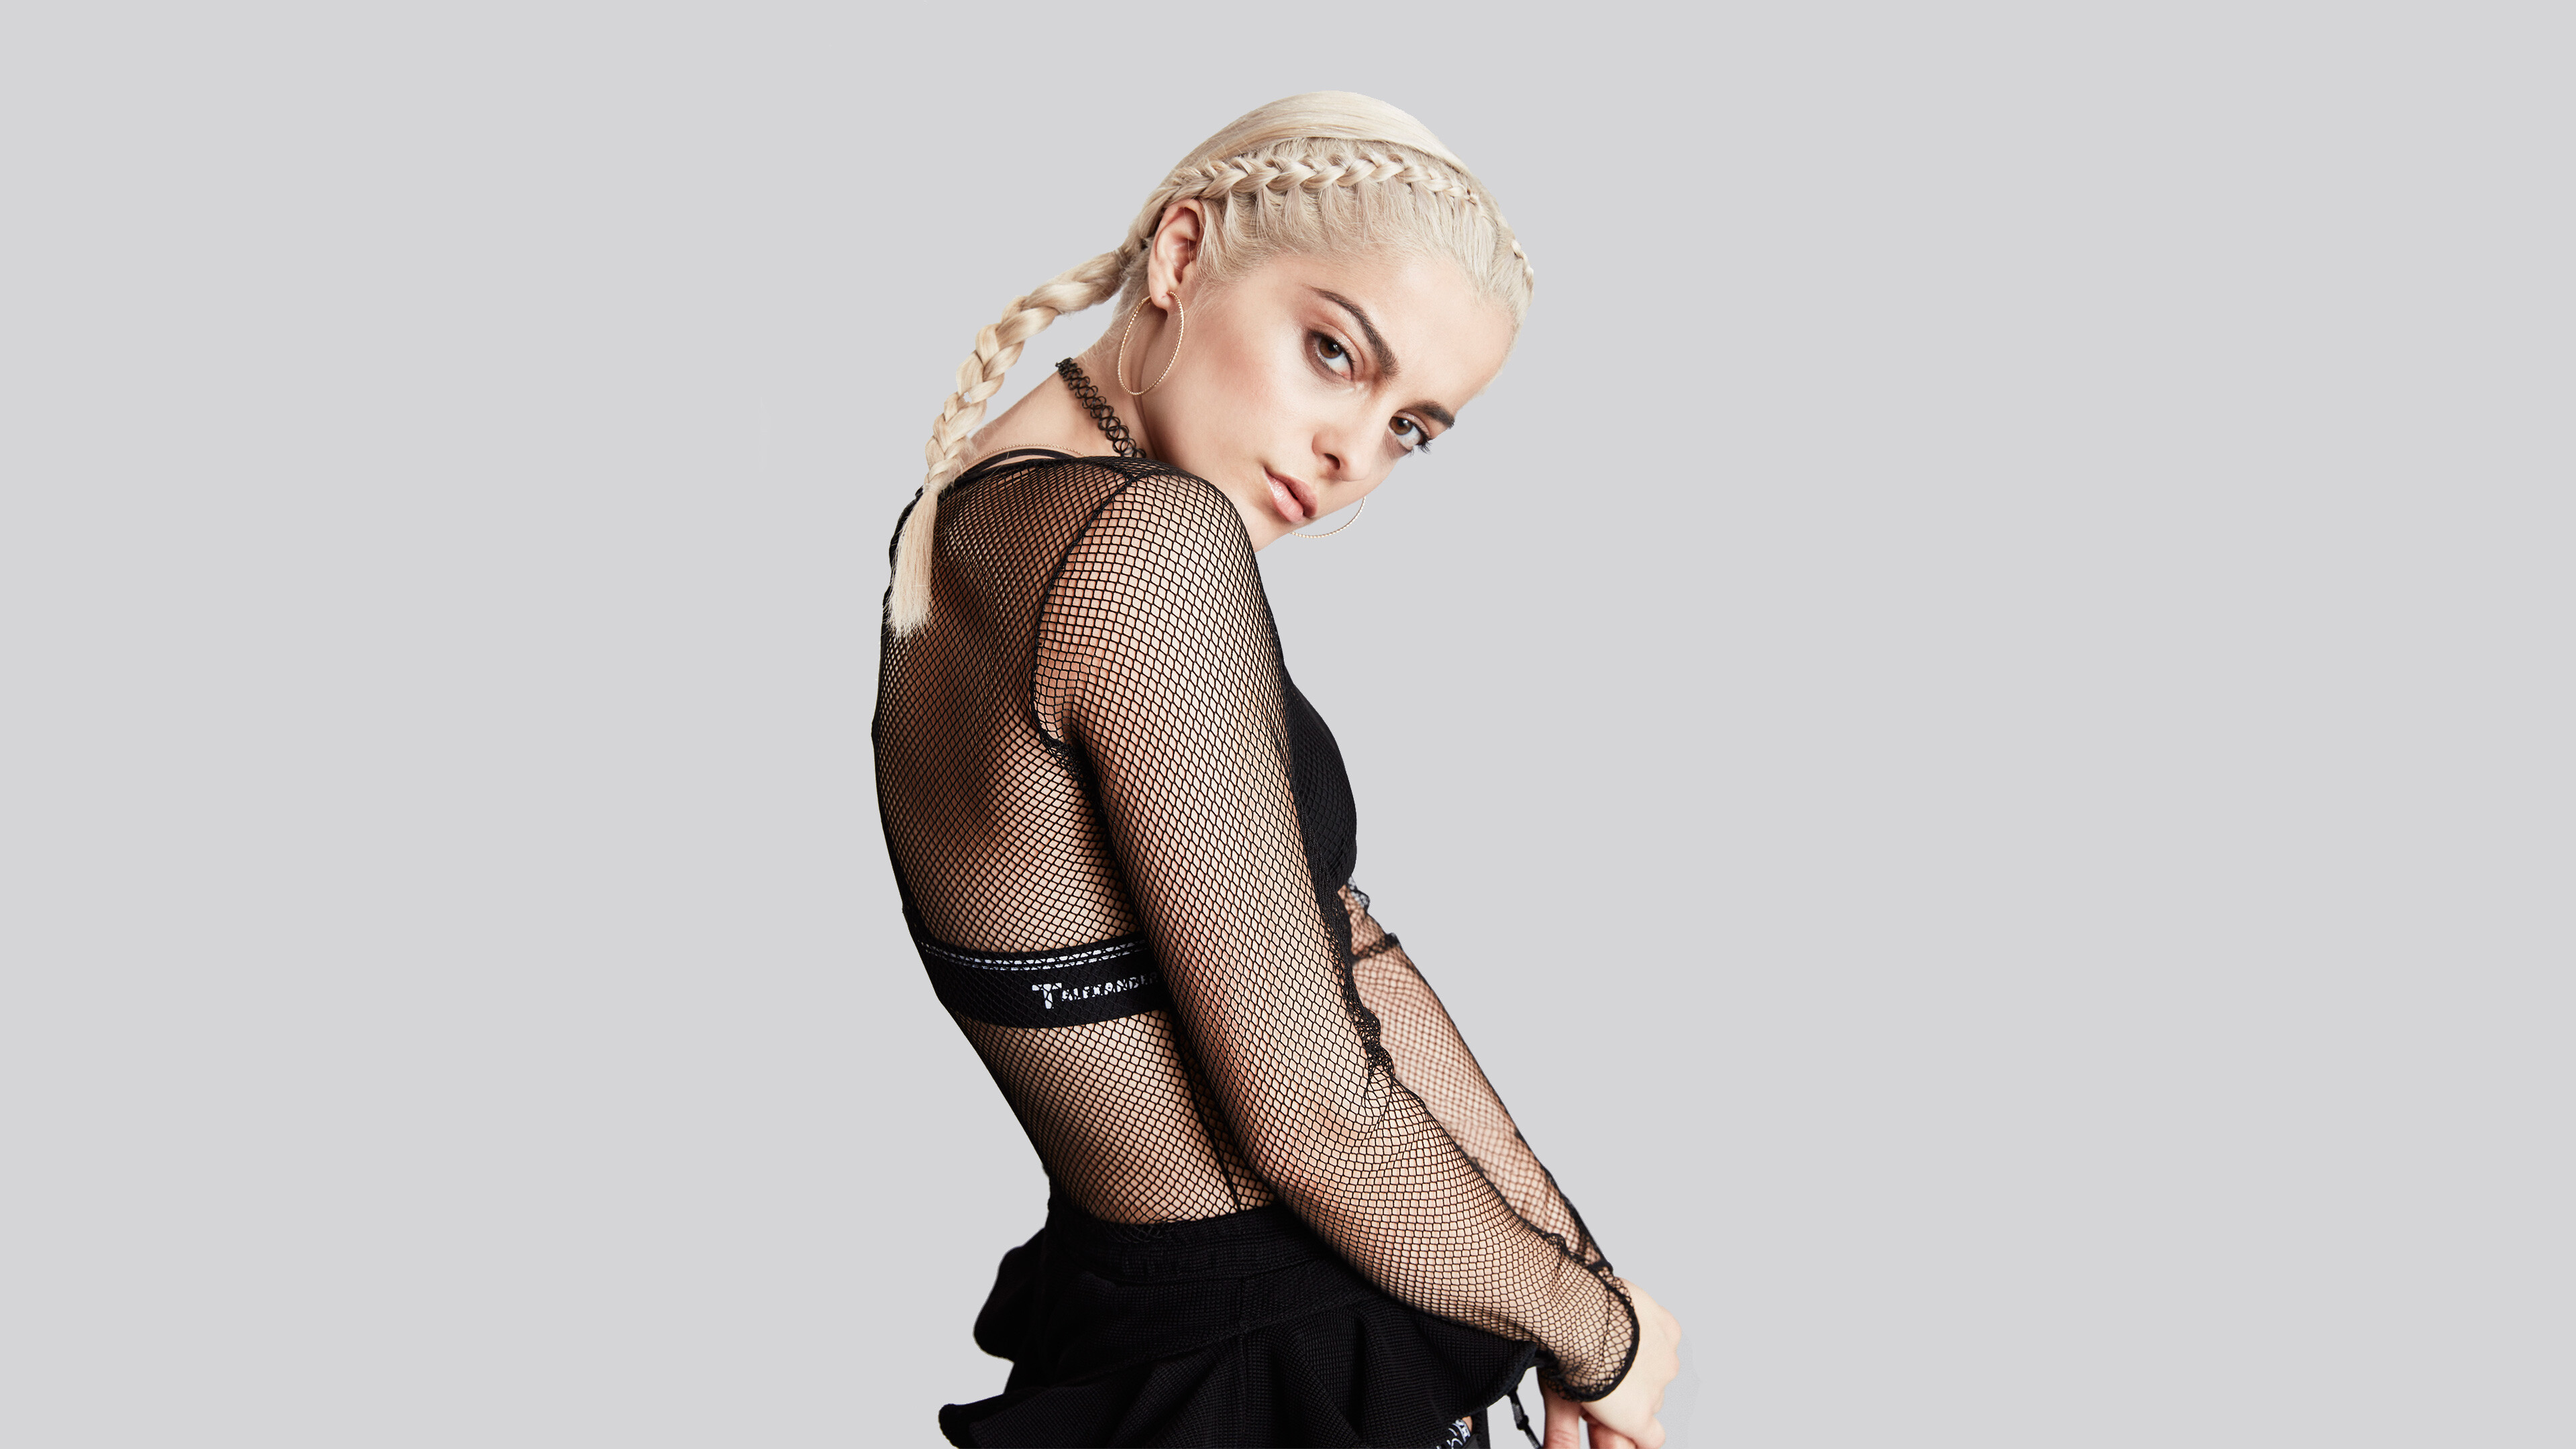 Bebe Rexha: An American singer and songwriter, Black Cards. 3840x2160 4K Background.